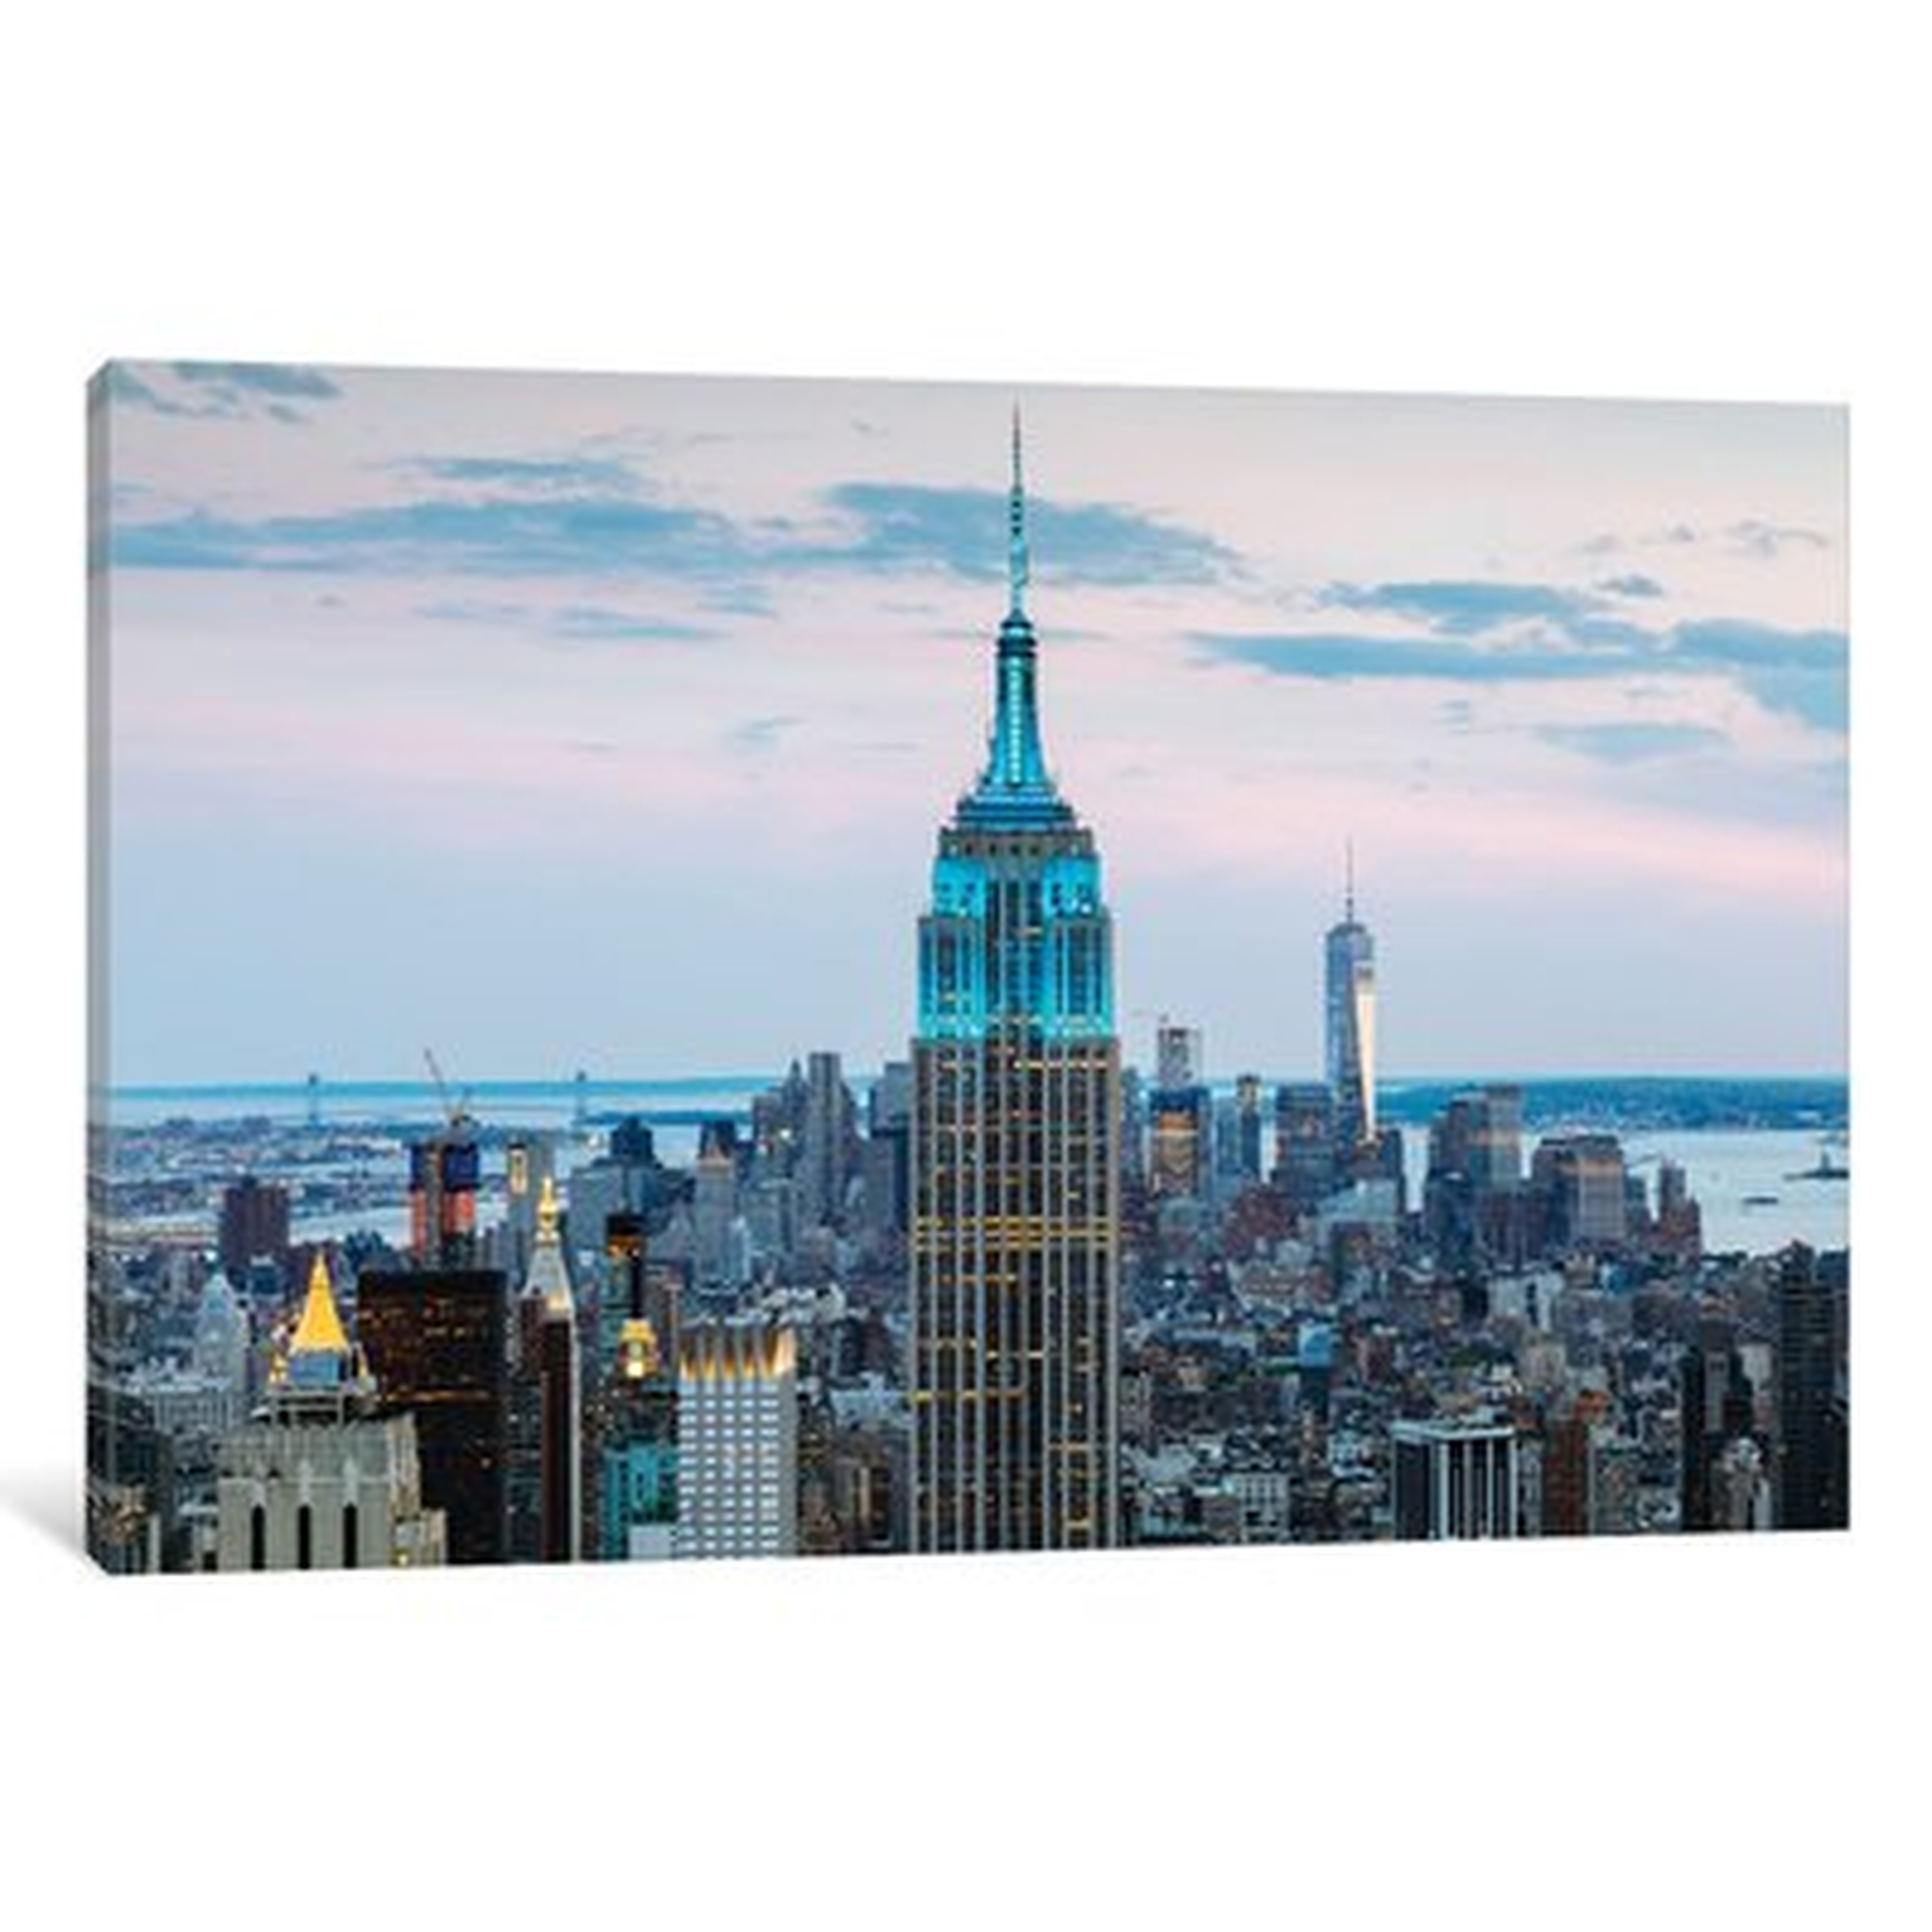 'Empire State Building at Dusk, Midtown, New York City, New York, USA' Photographic Print on Wrapped Canvas - Wayfair